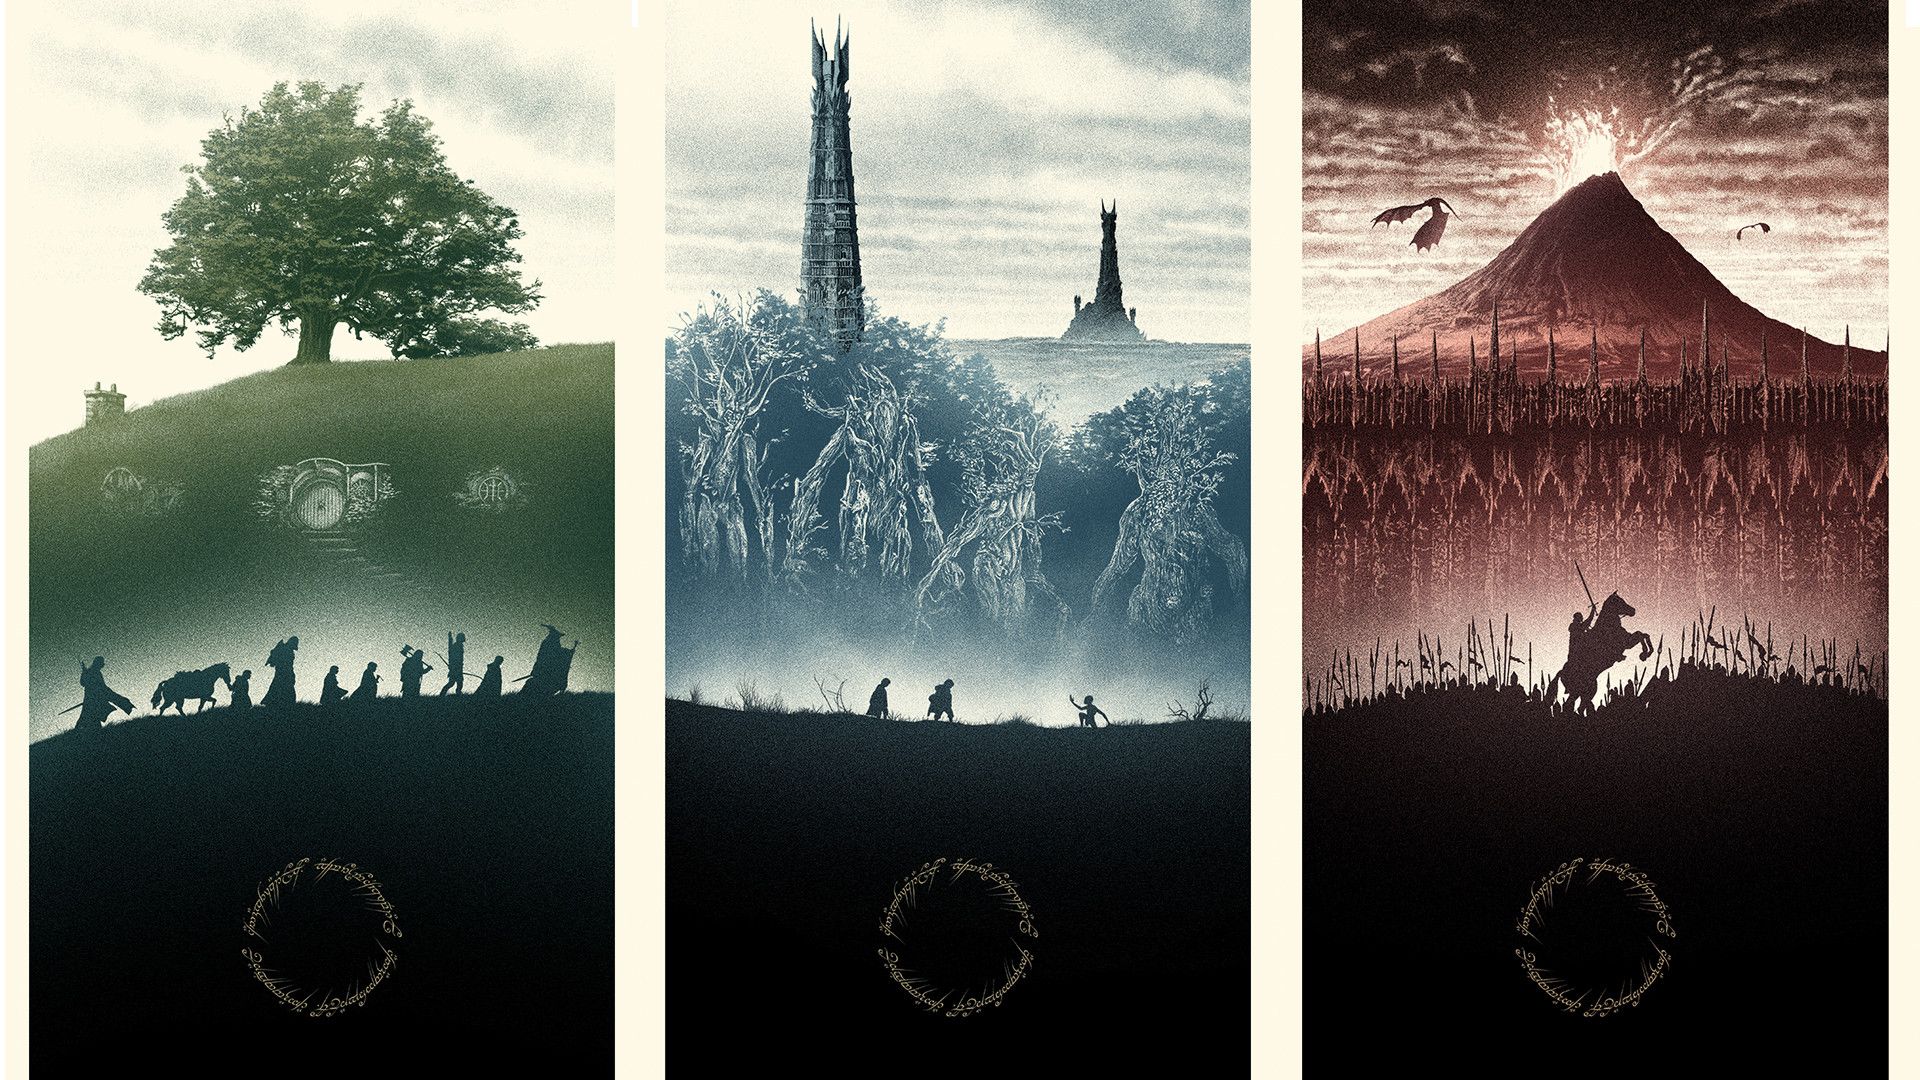 Lord of the Rings wallpaper, by Marko Manev 1920x1080 lotr